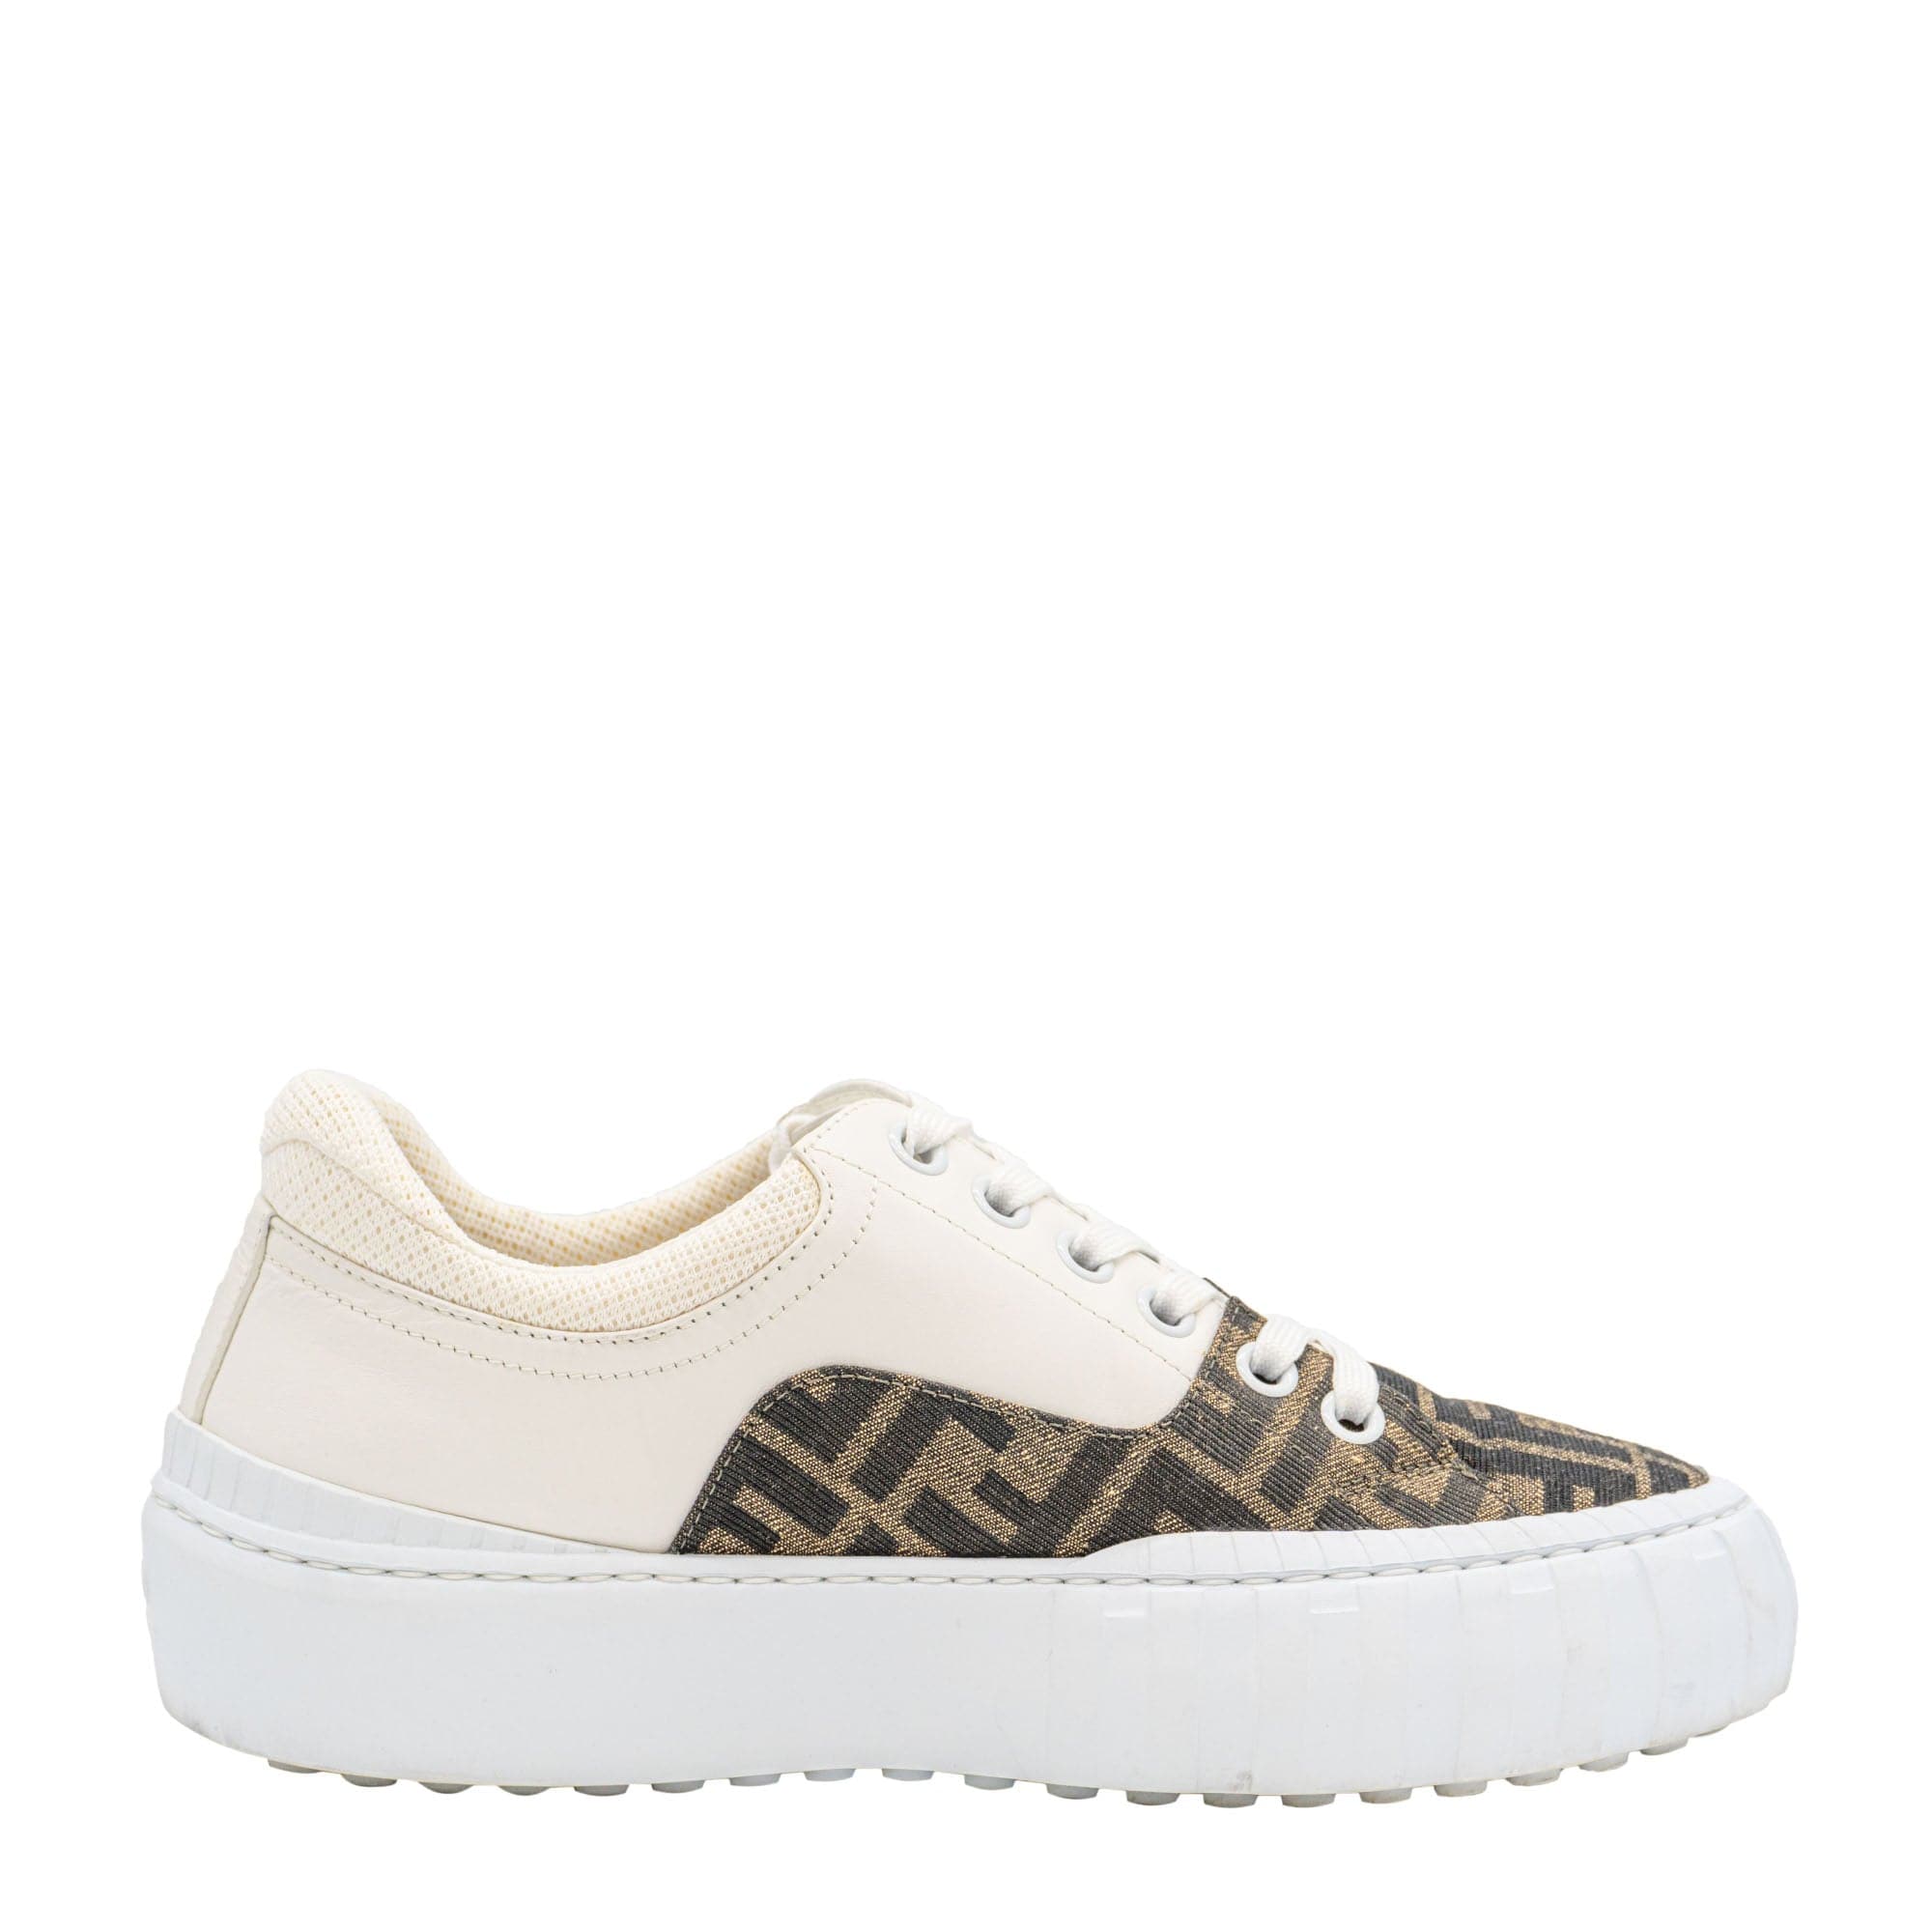 Fendi Fendi Force Leather and FF Canvas Sneakers 6 SYCH044